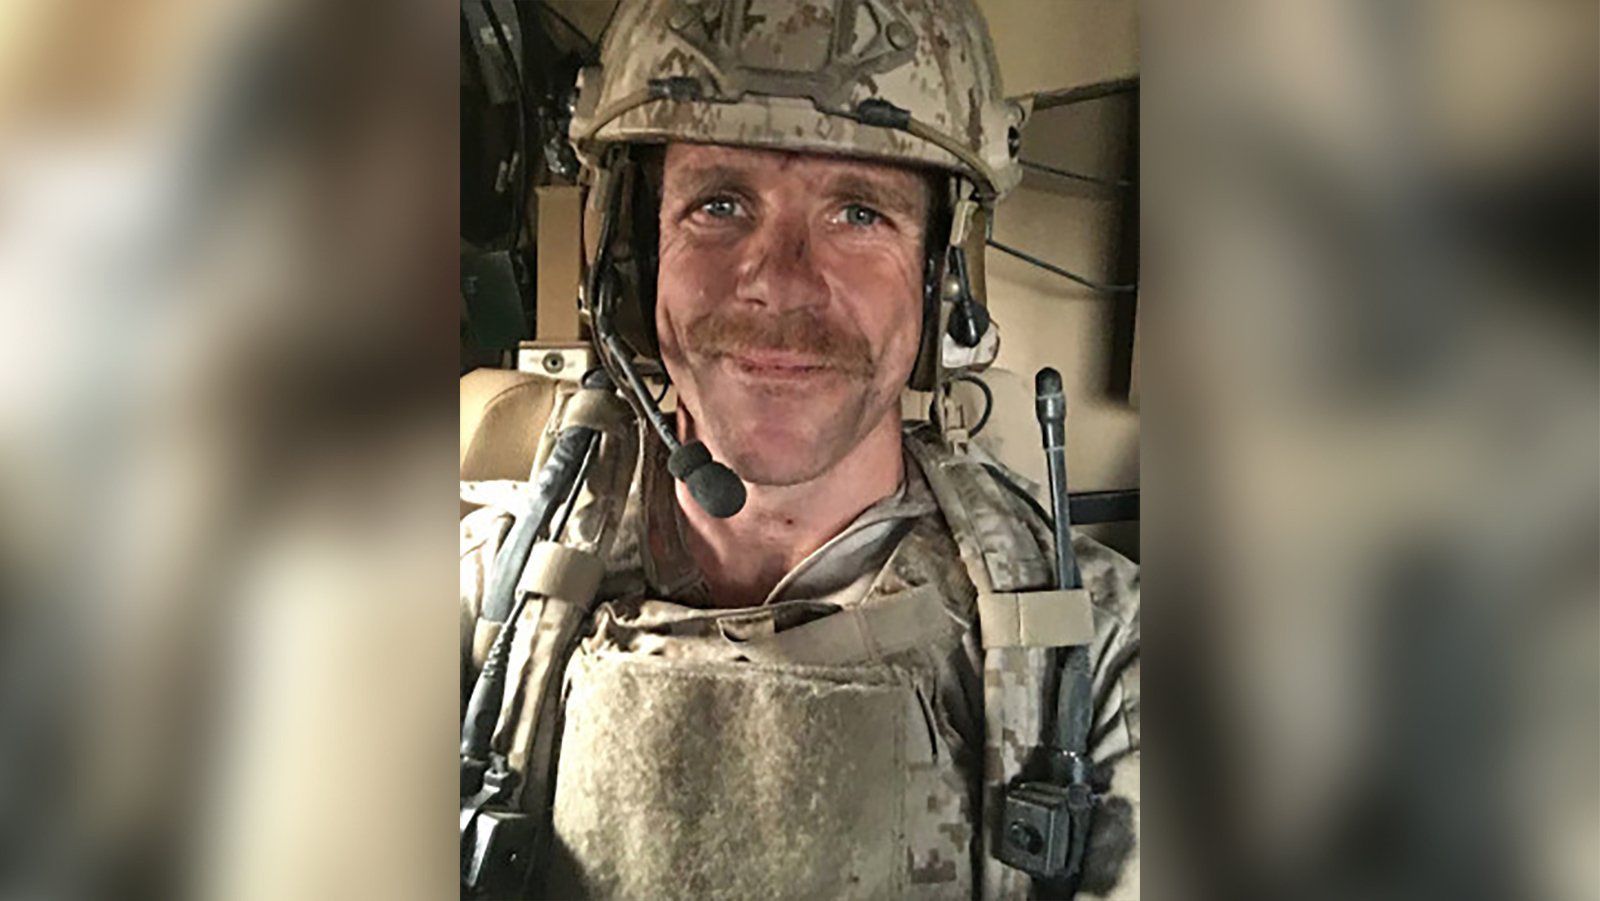 war crimes case of navy seal eddie gallagher expands to seal team 6 ahead of trial